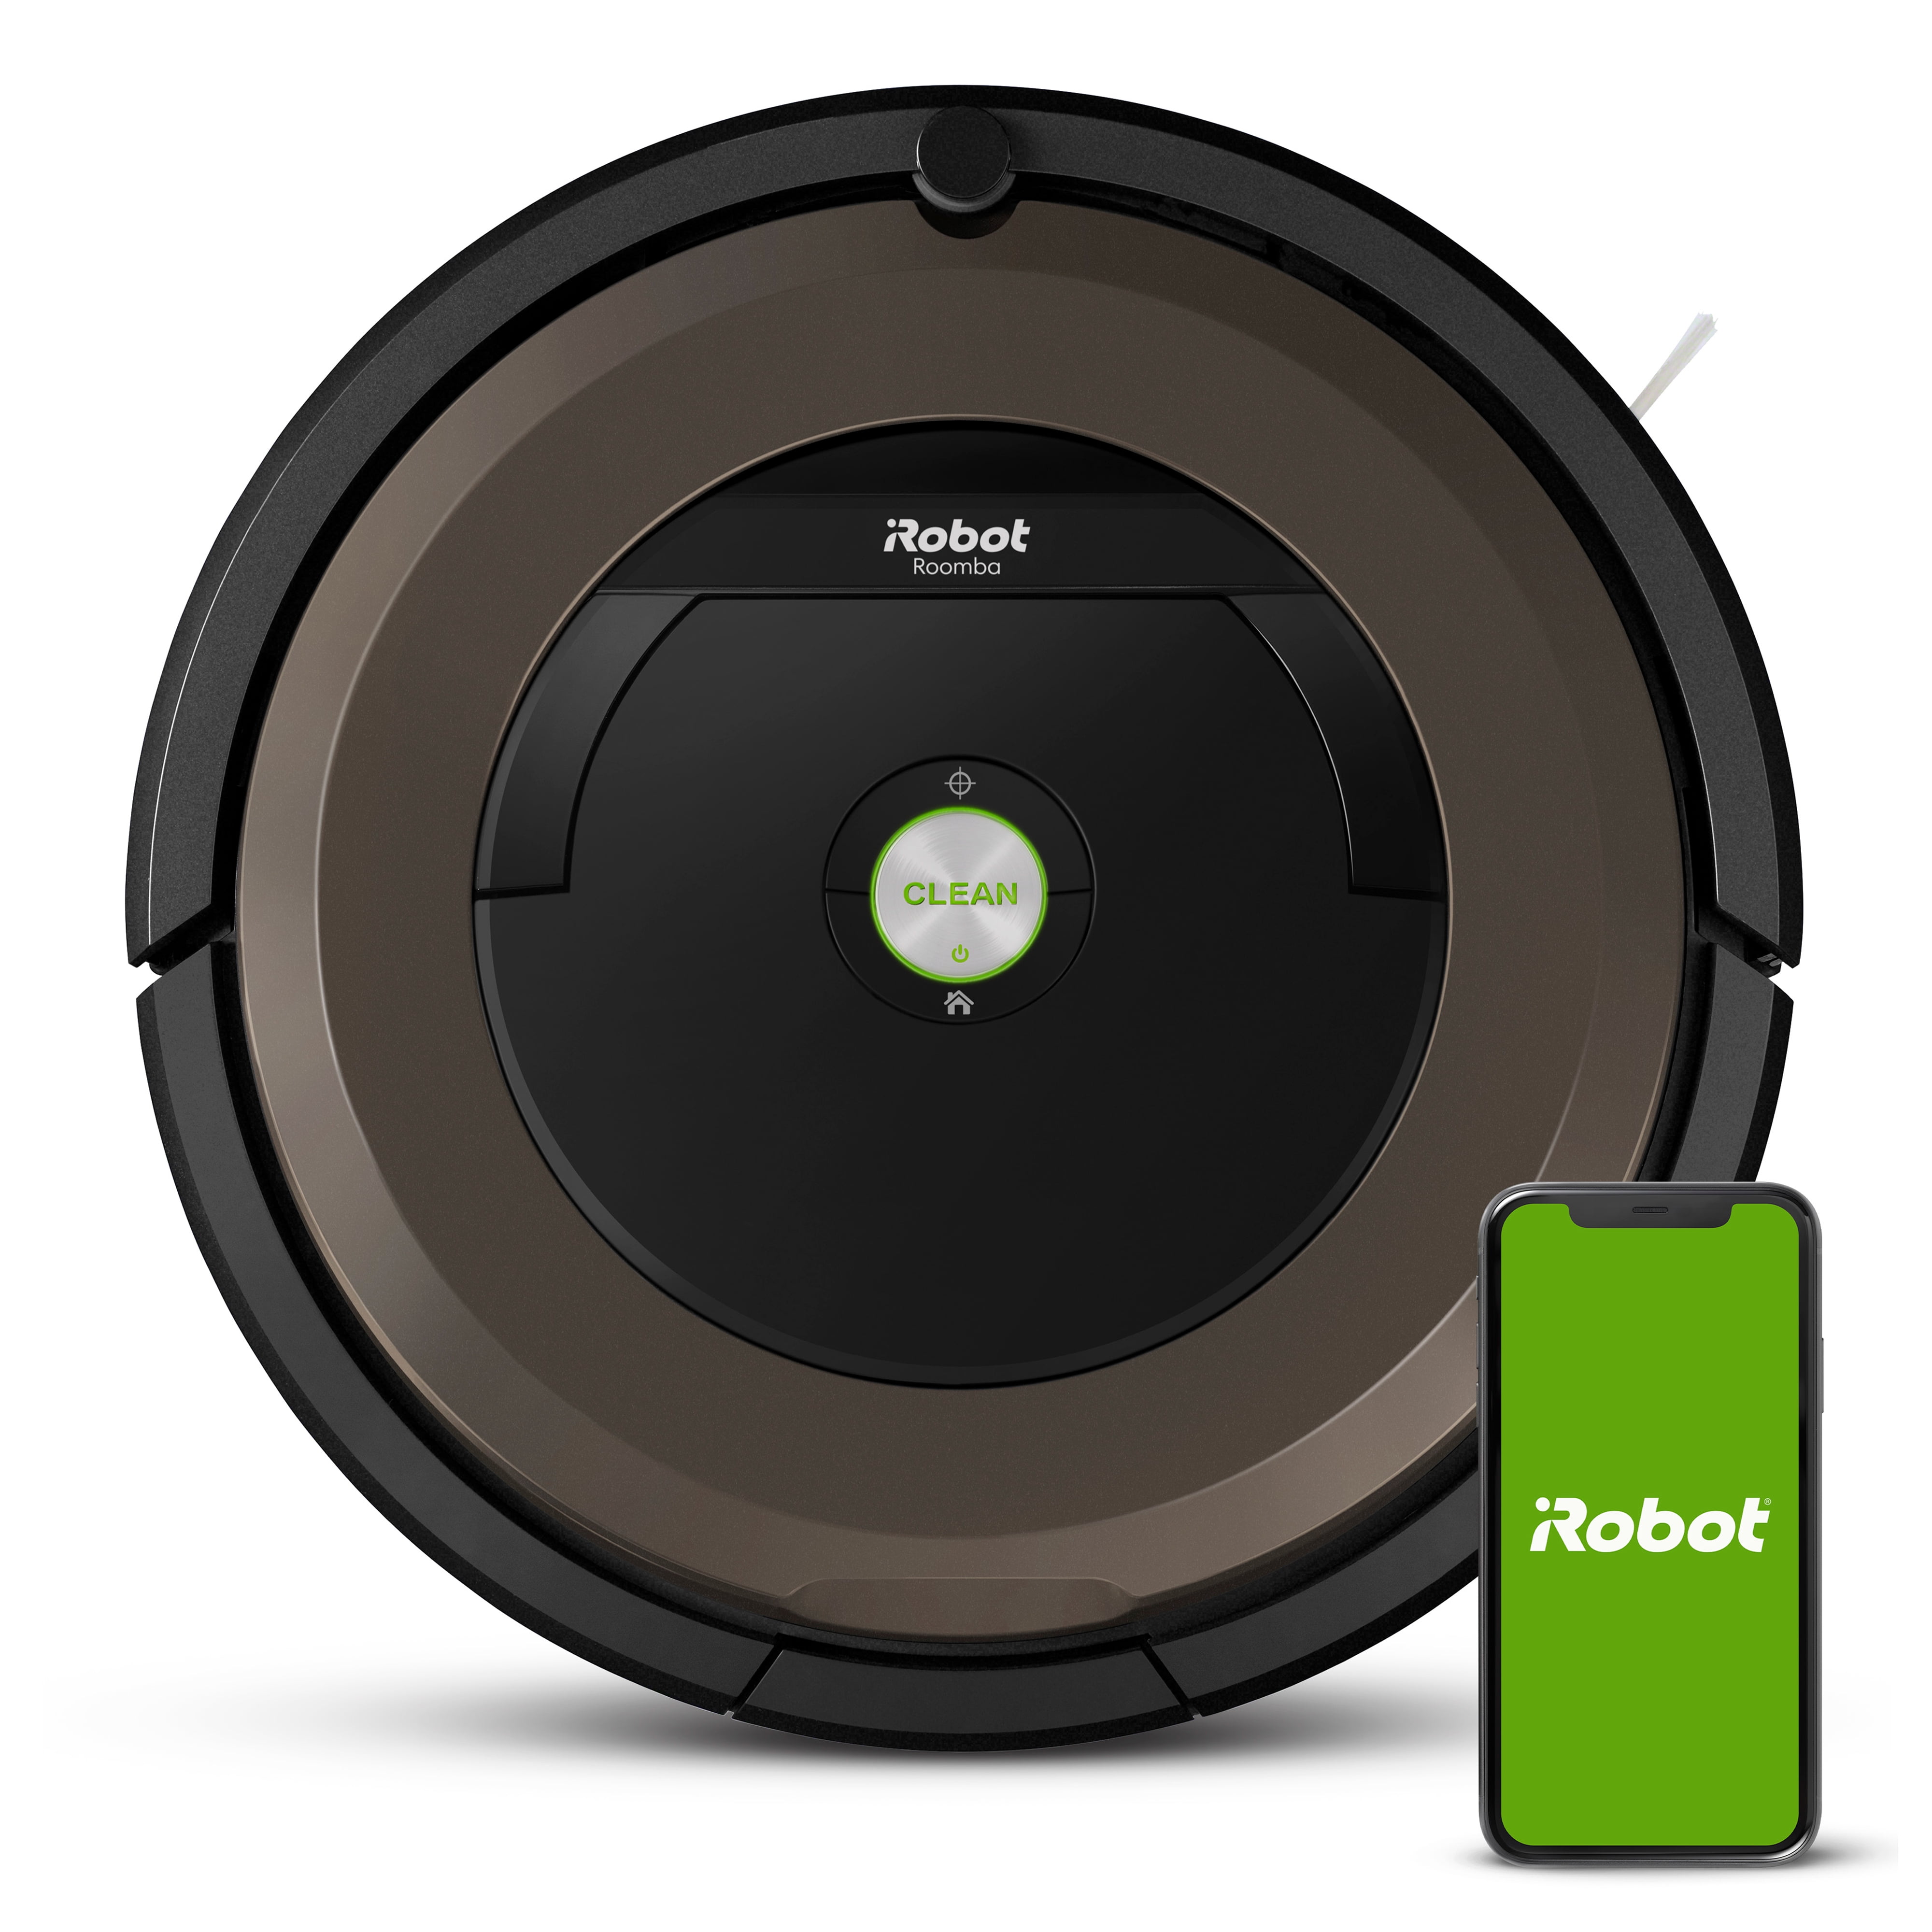 iRobot Roomba 890 Vacuum- Connected, Works with Google Ideal for Pet Hair, Carpets, Hard Floors Walmart.com